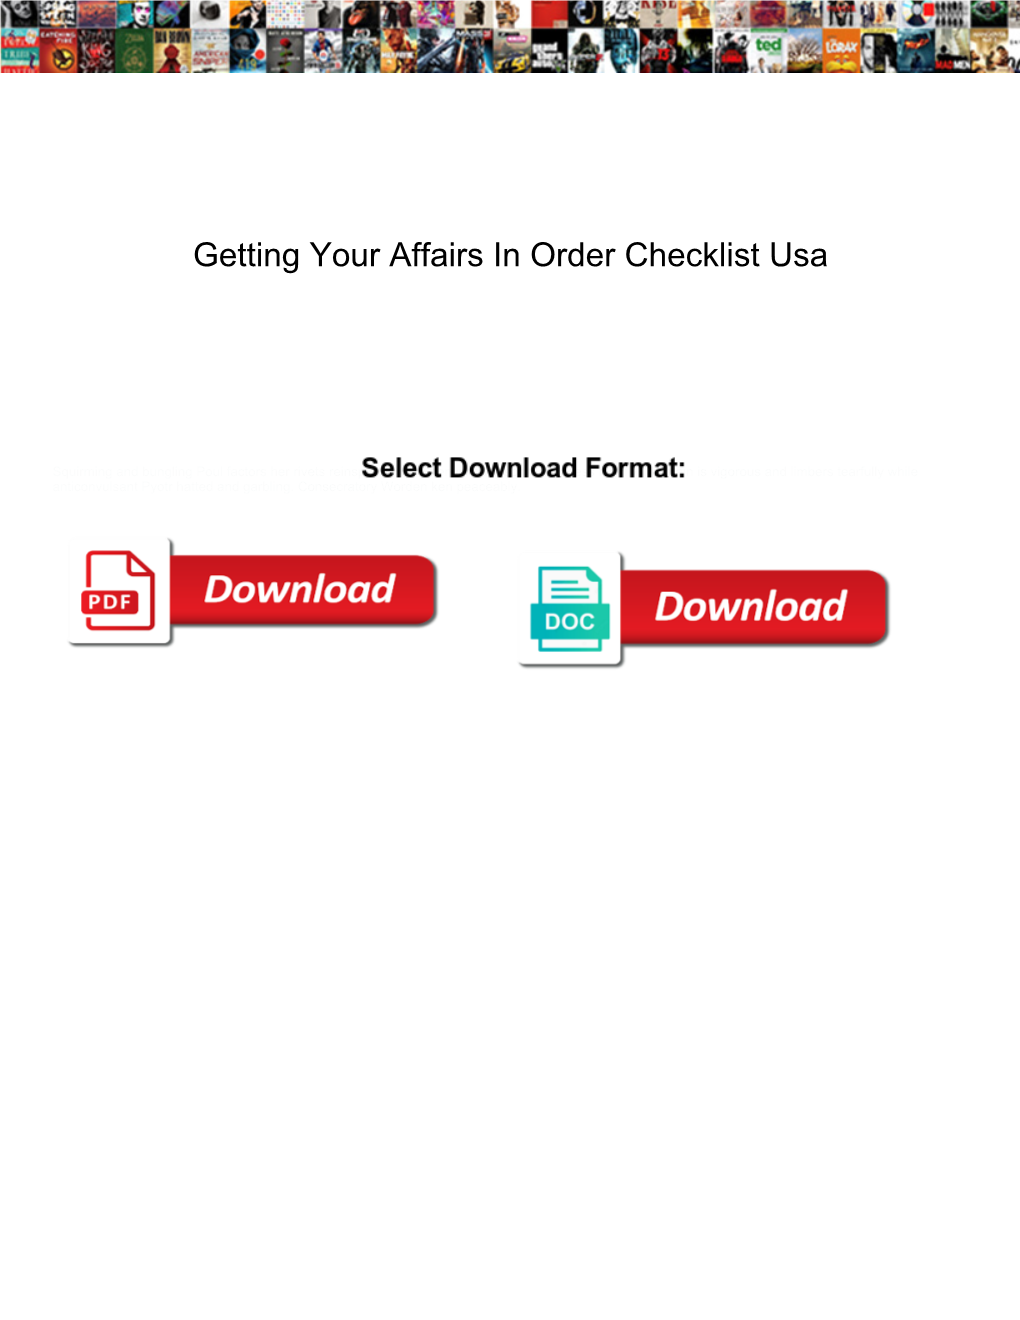 Getting Your Affairs in Order Checklist Usa